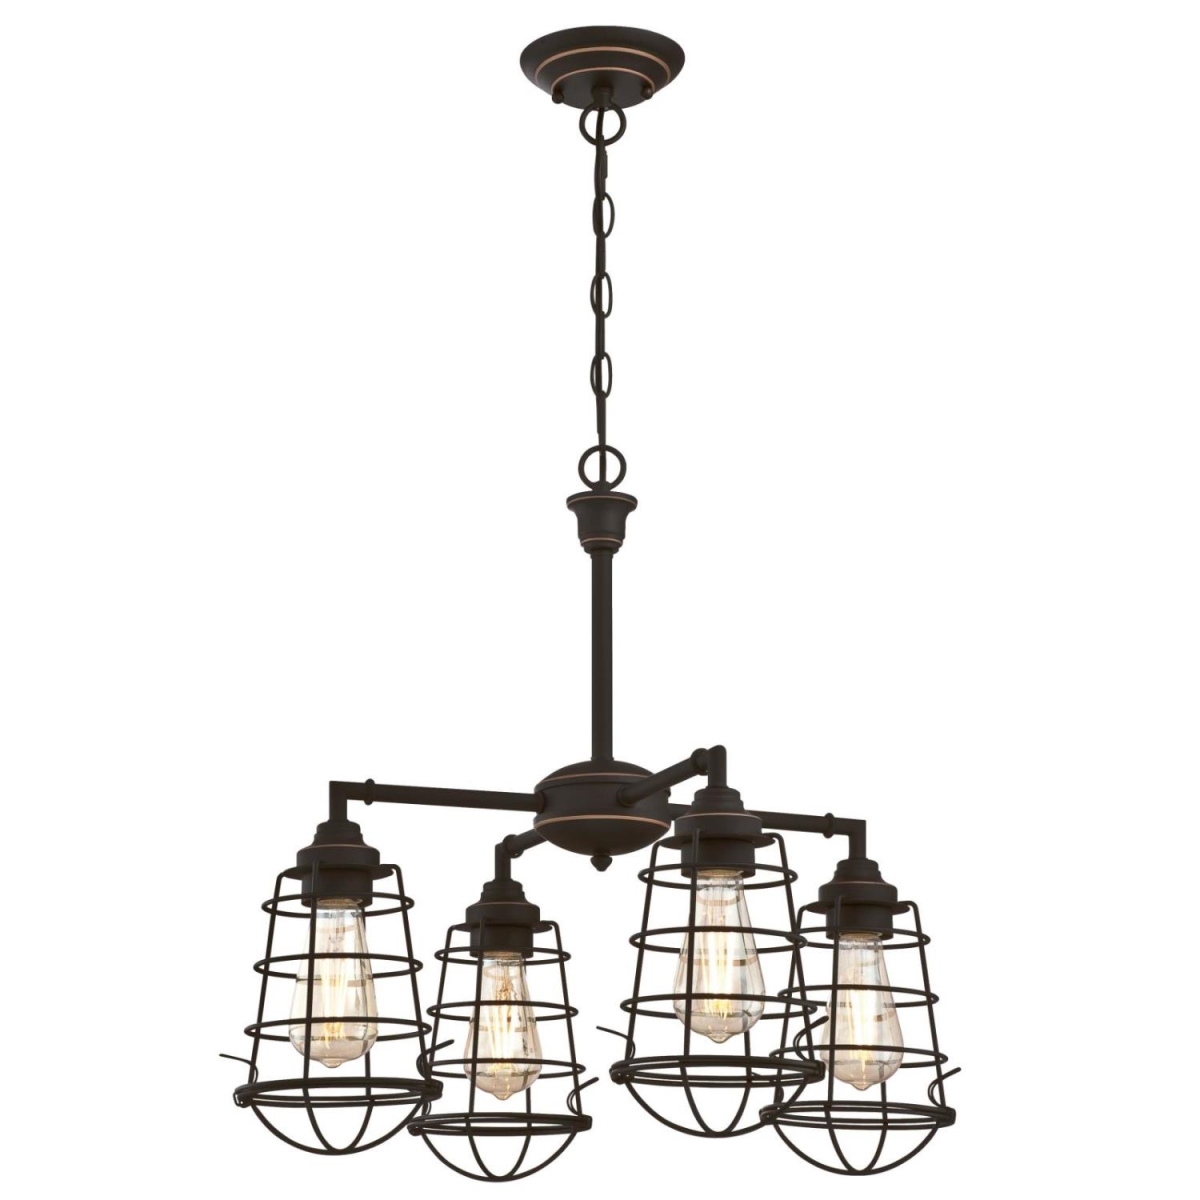 6367000 4 Light Chandelier & Semi-flush With Highlights & Cage Shades - Oil Rubbed Bronze